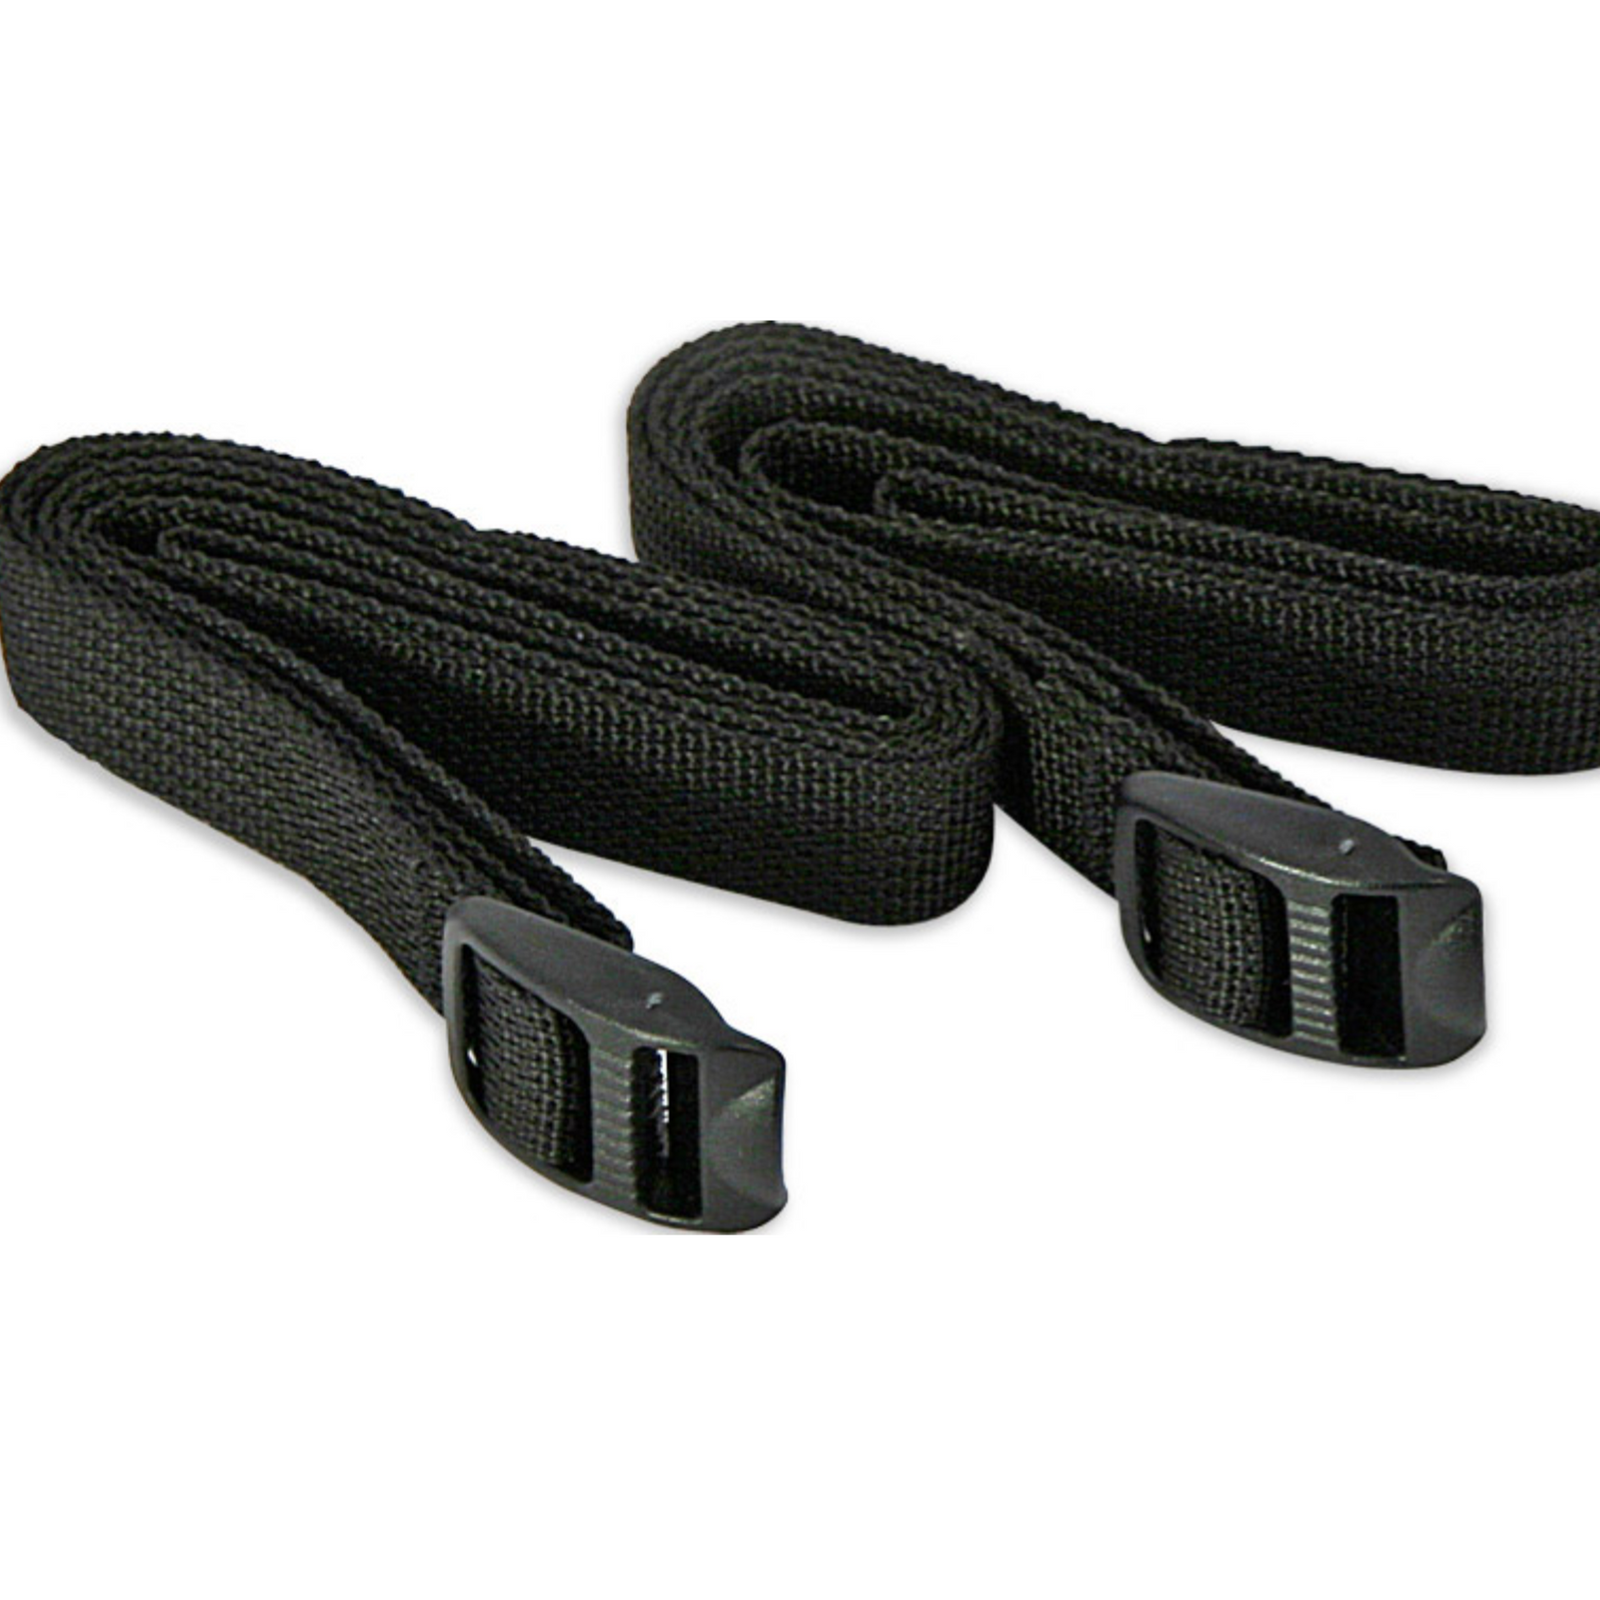 mattress or accessory straps by thermarest